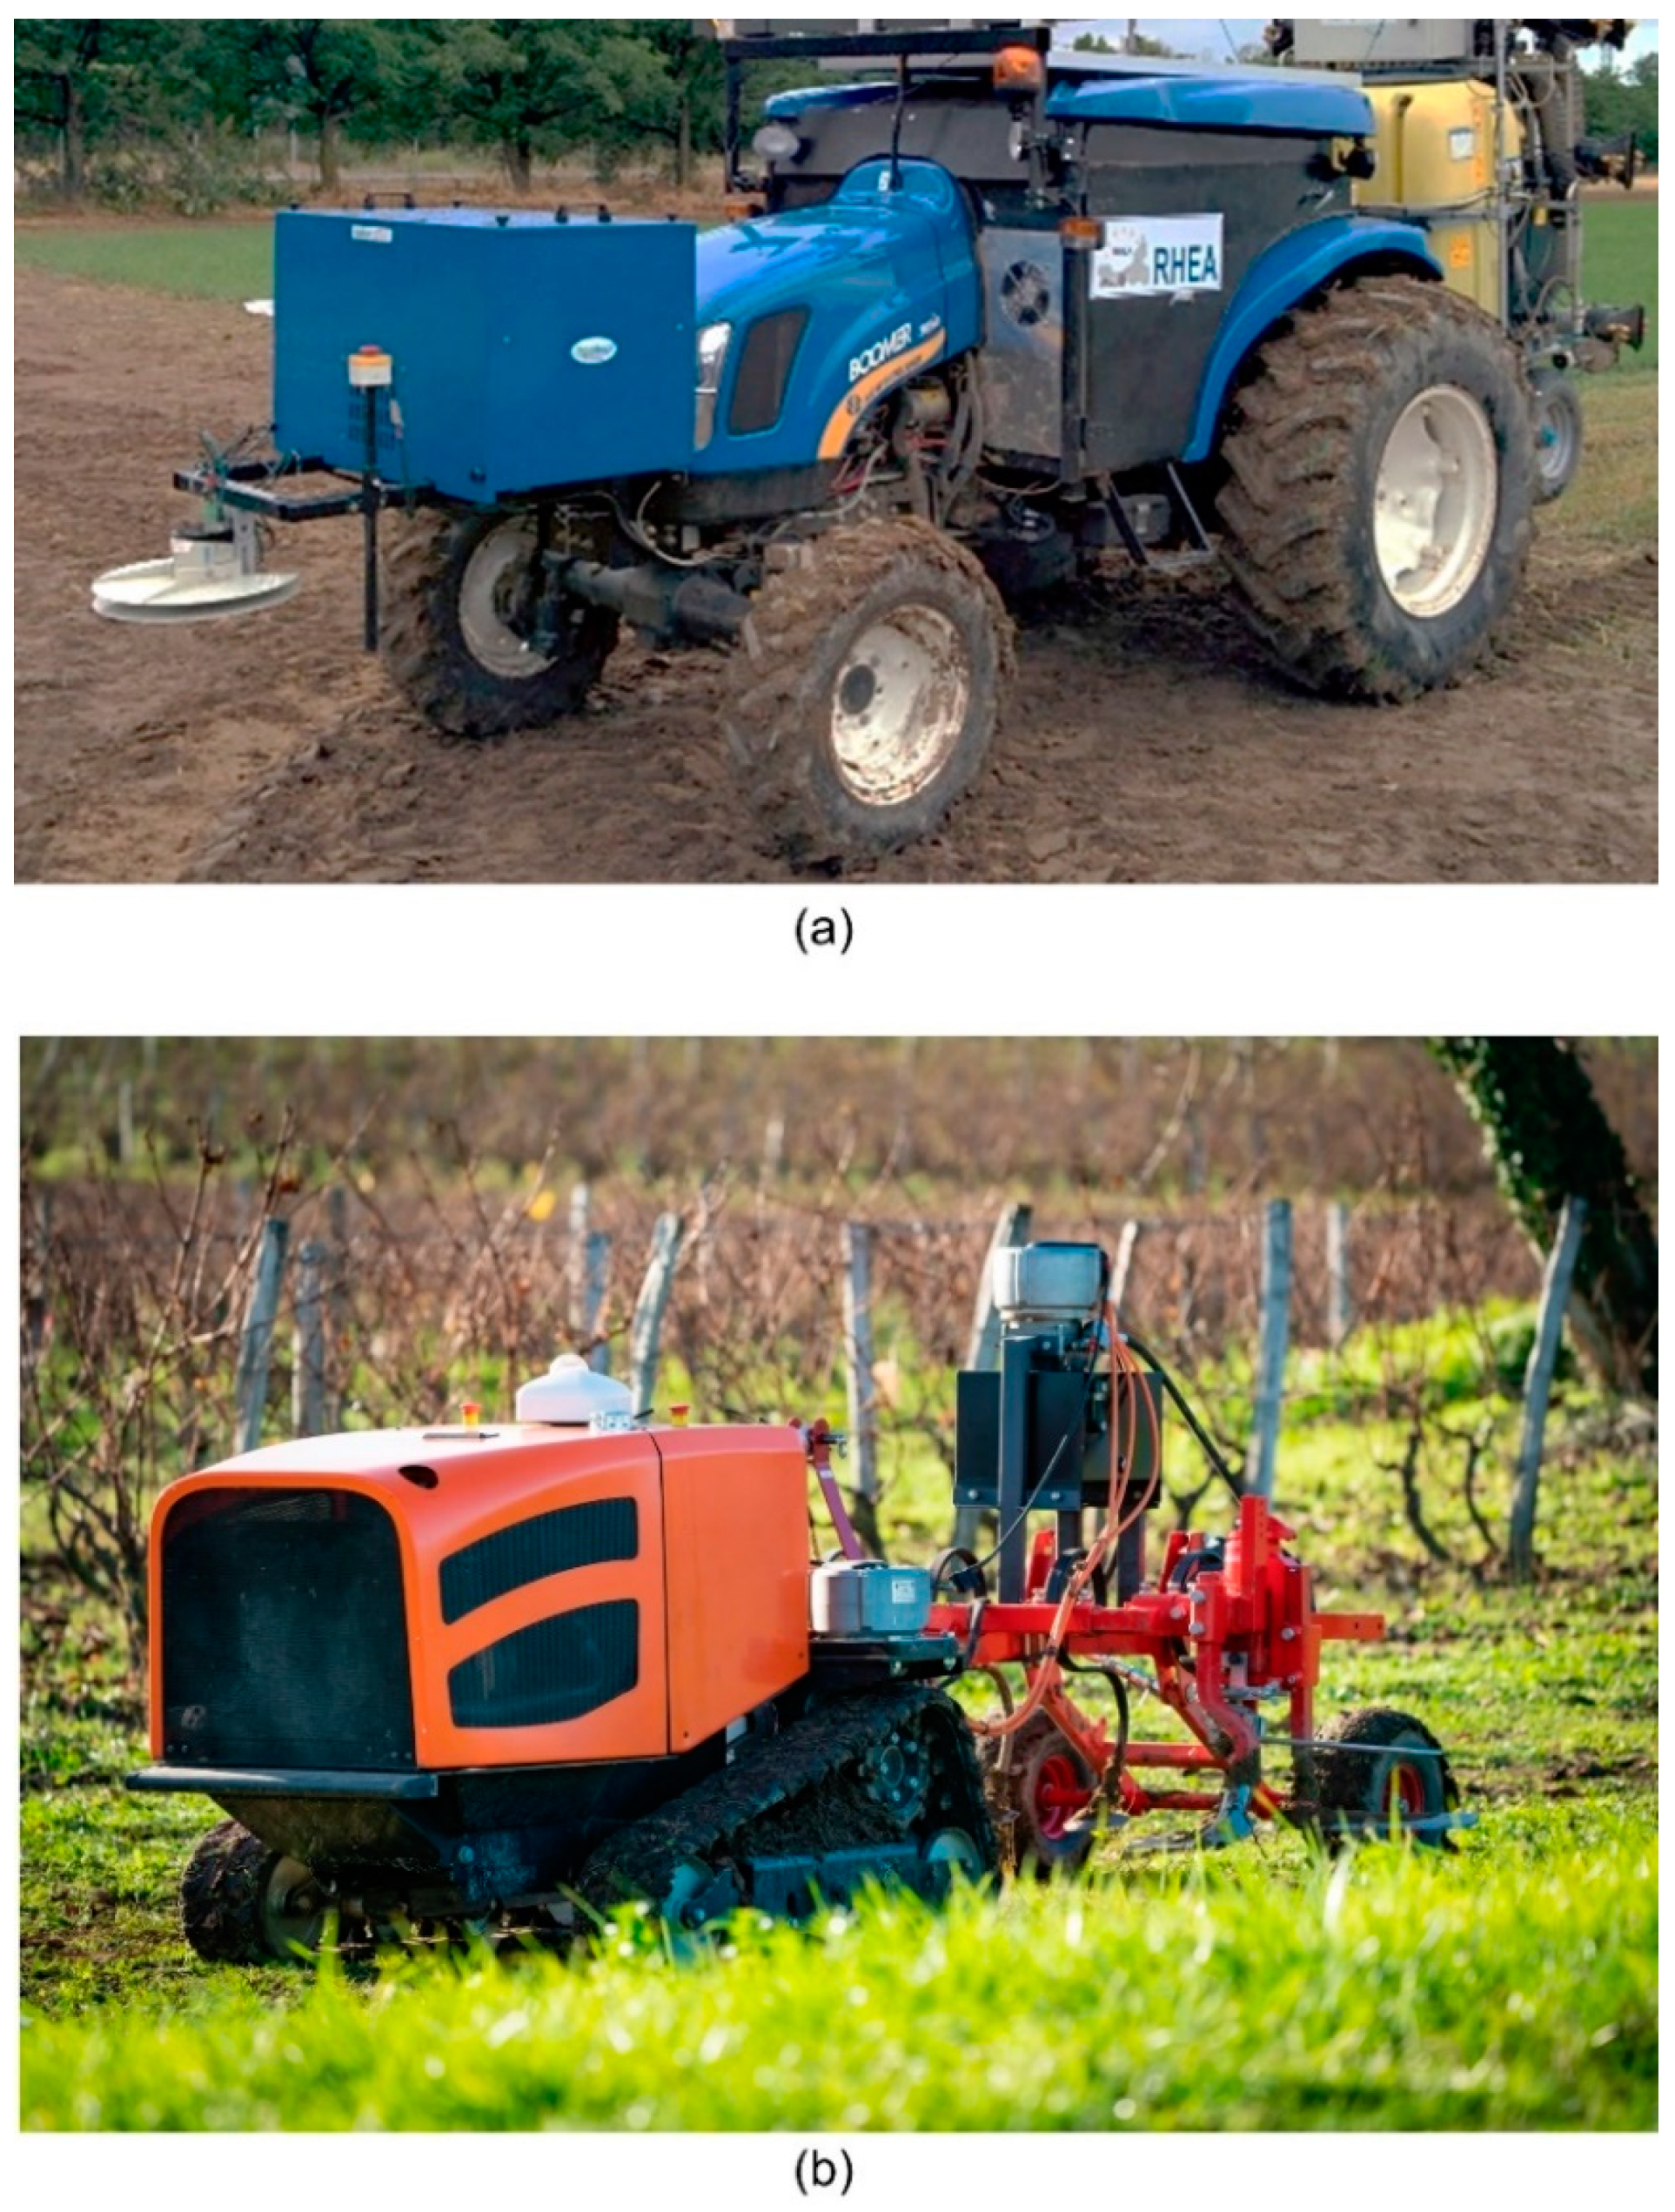 https://www.mdpi.com/agriculture/agriculture-13-01005/article_deploy/html/images/agriculture-13-01005-g001.png